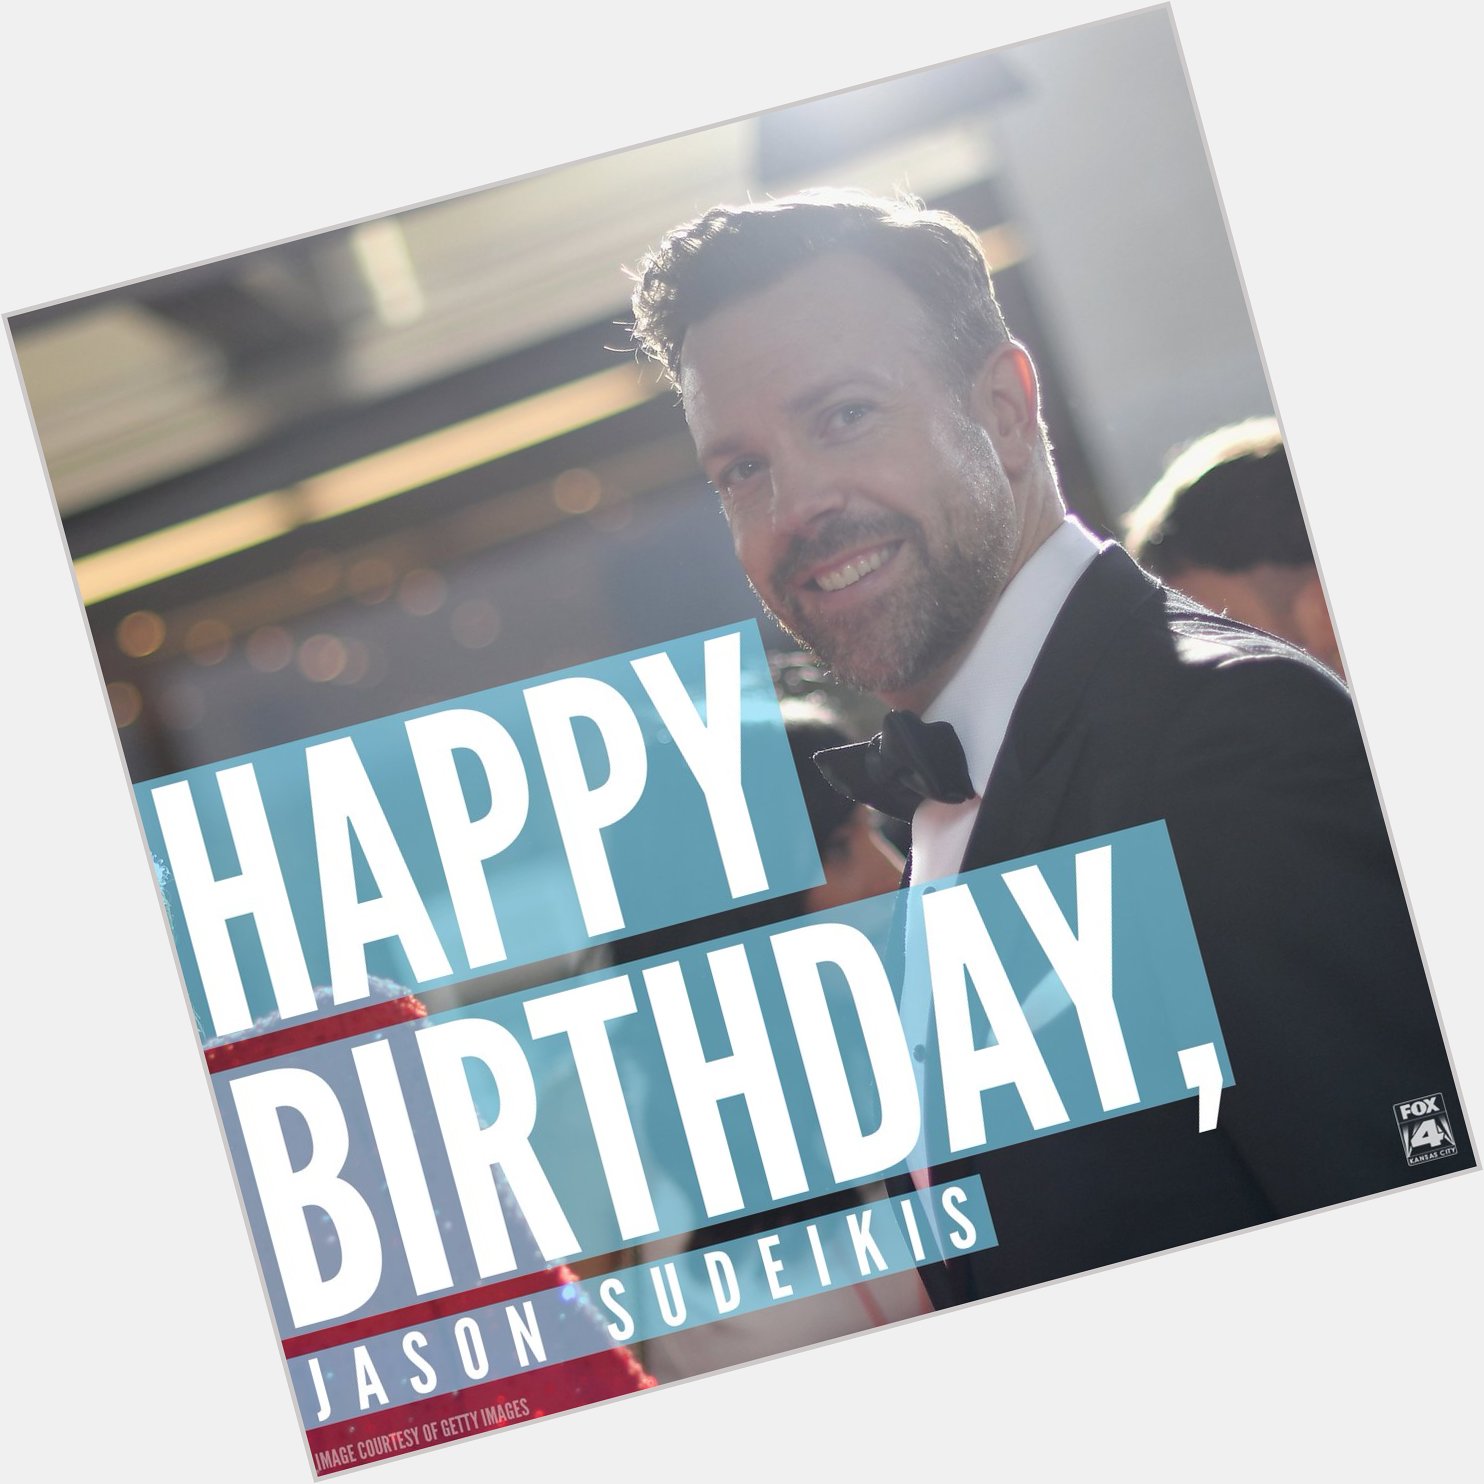    Happy birthday to this Overland Park, Kan., native! 
Jason Sudeikis, we hope you have a wonderful day :) 